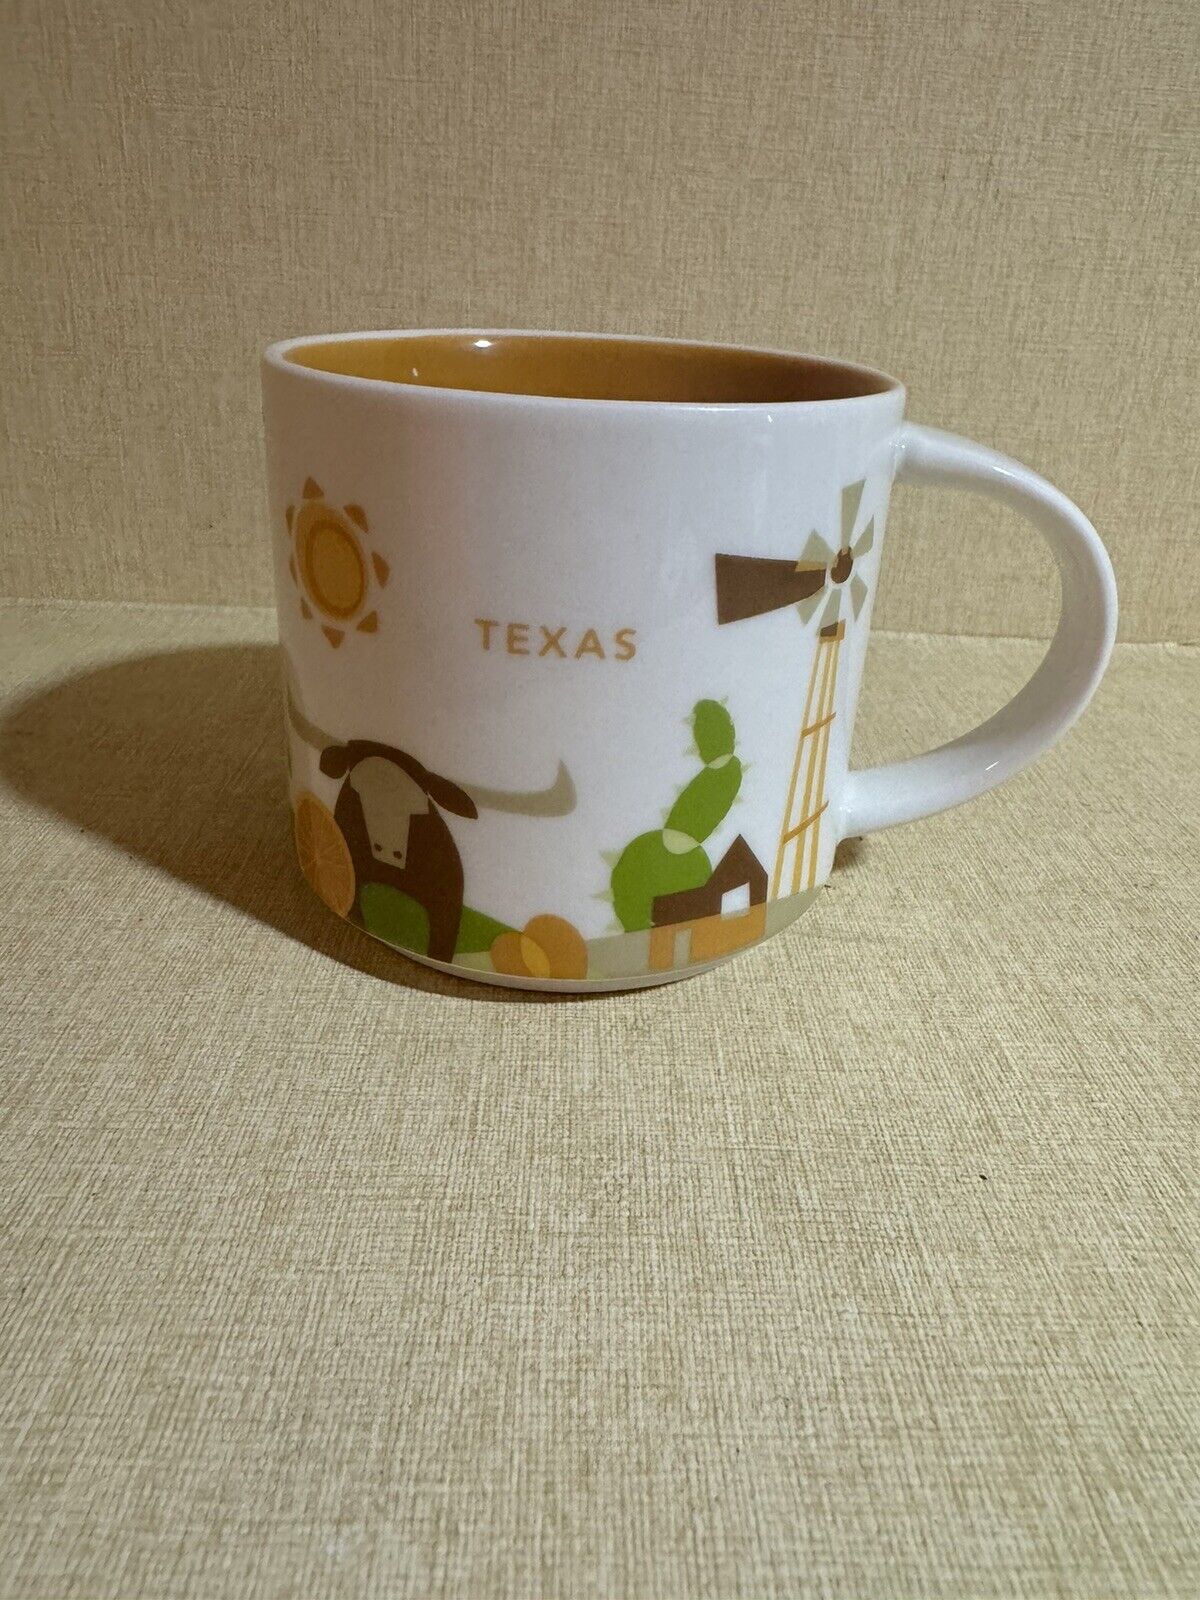 2015 Starbucks Coffee You Are Here Collection mug Cup TEXAS Longhorn Star Desert